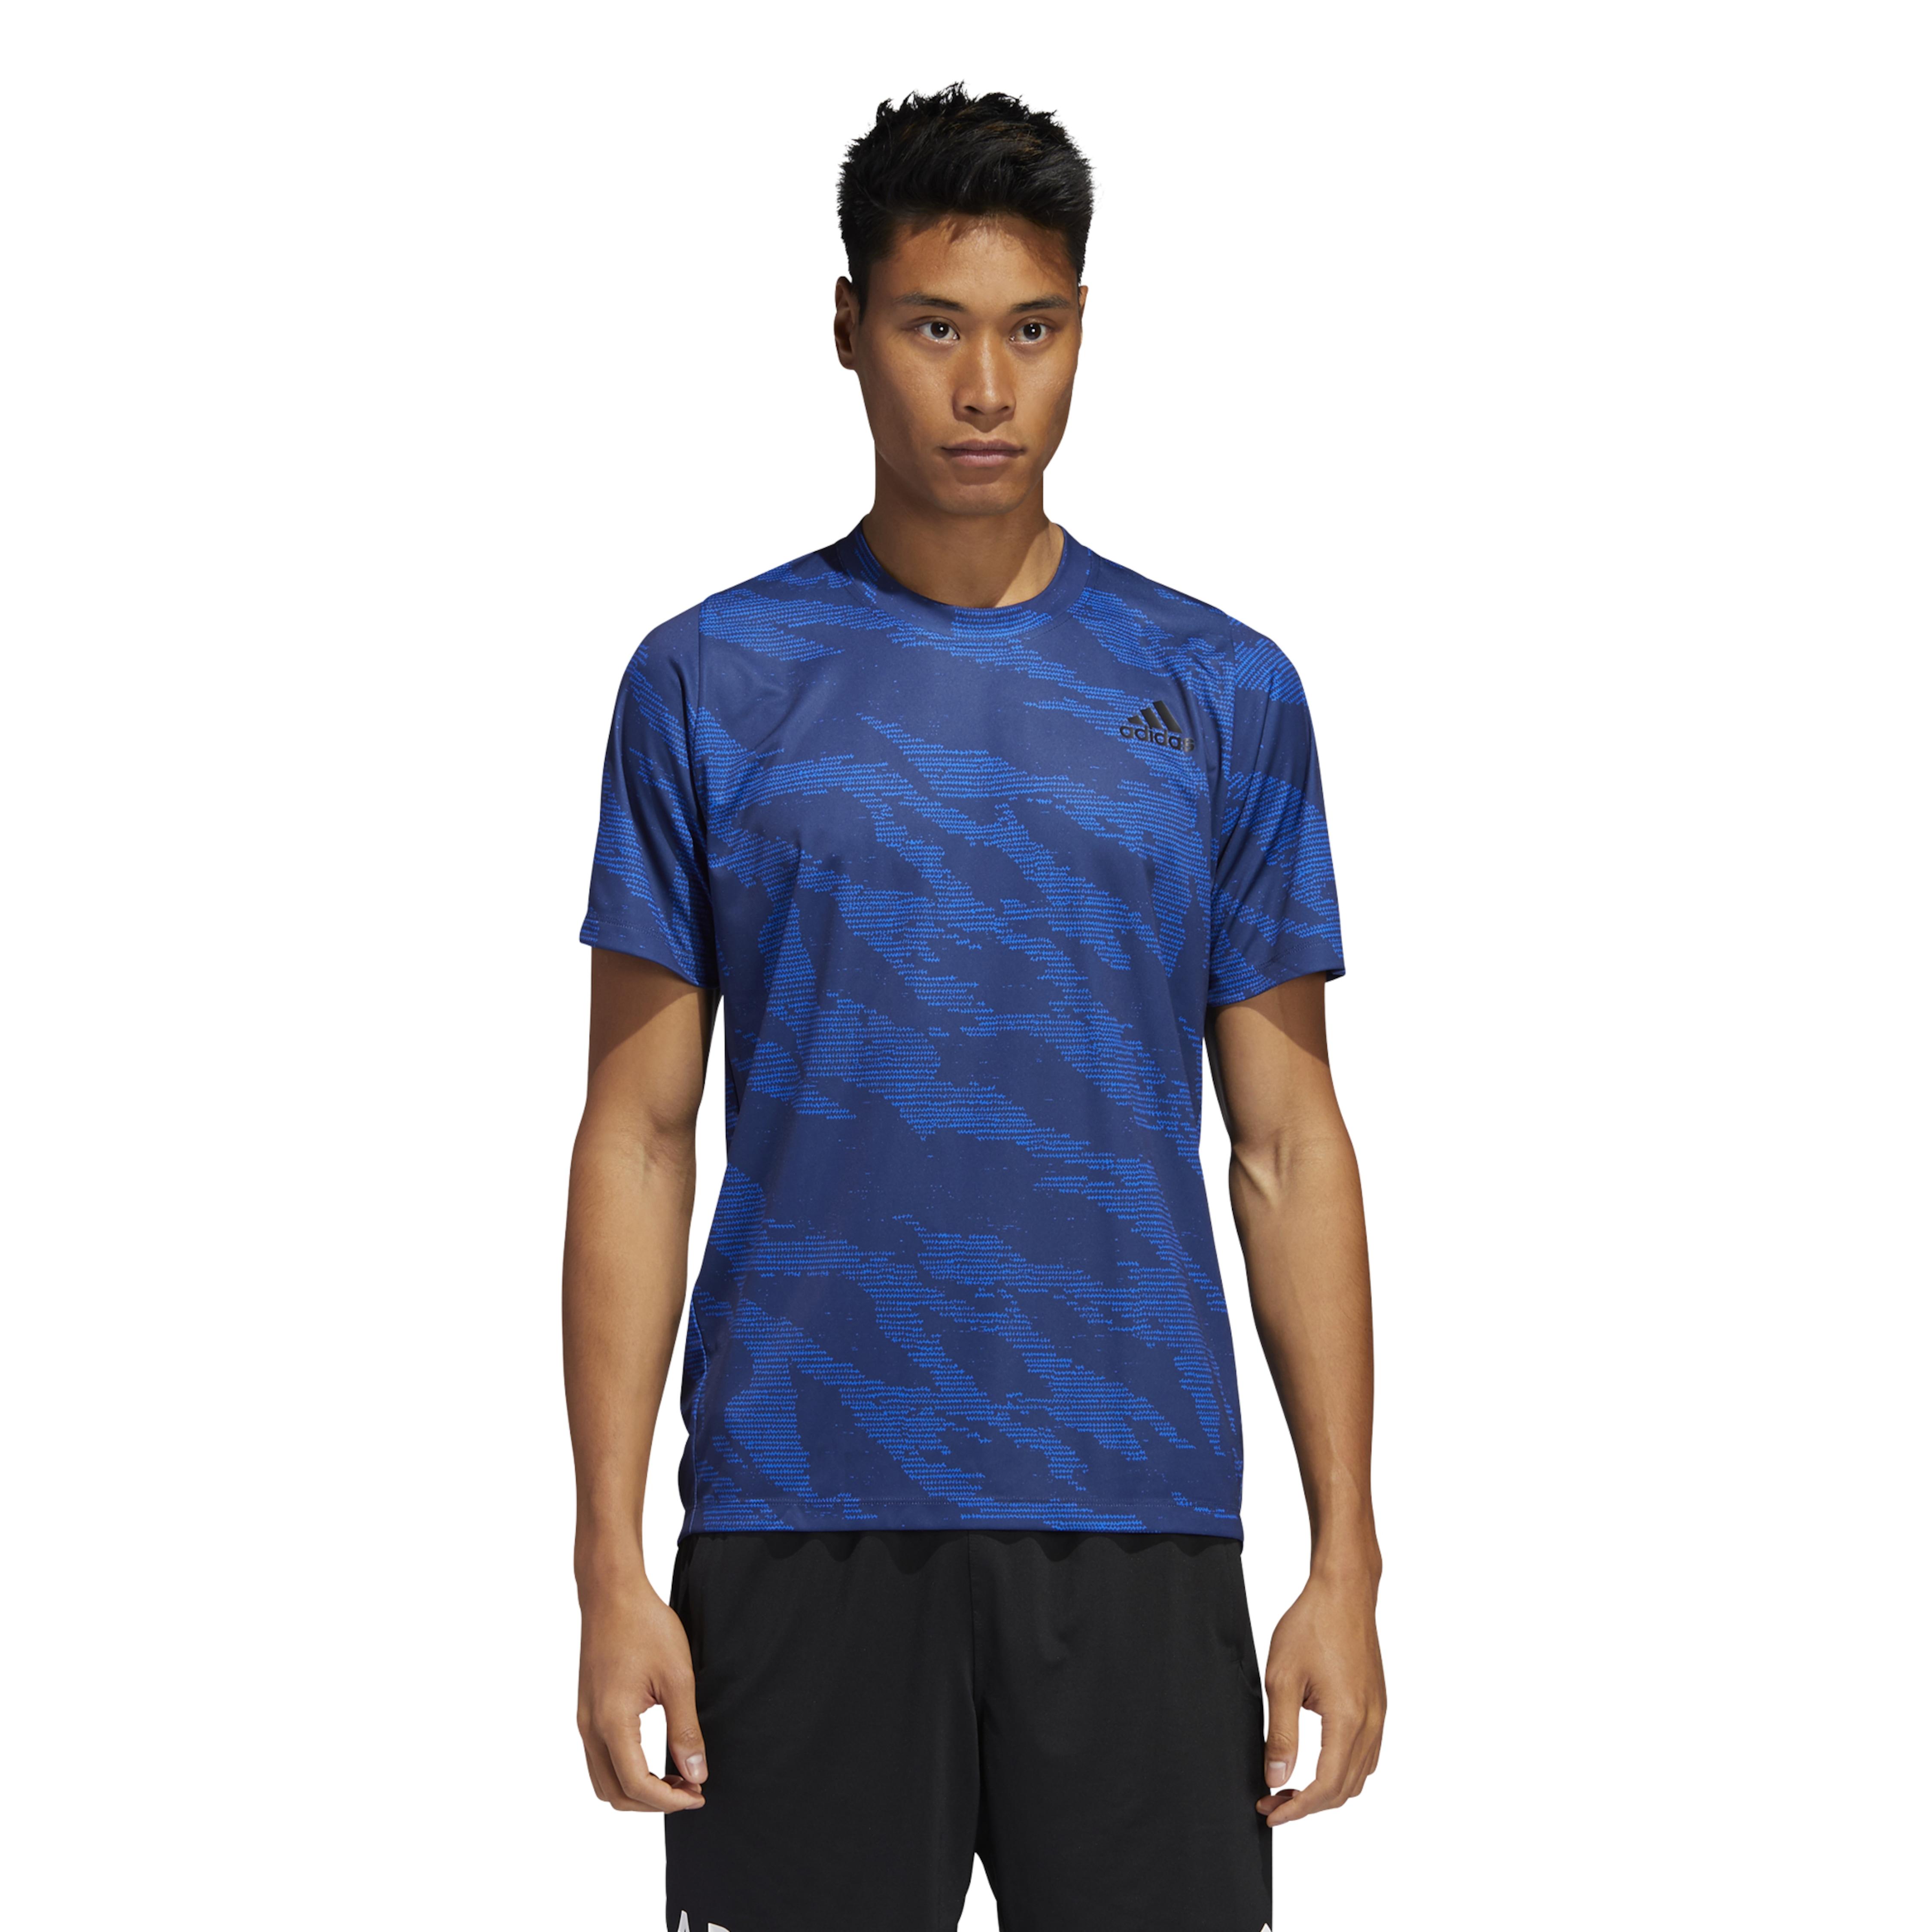 adidas Synthetic True Camo T-shirt in Blue for Men - Lyst